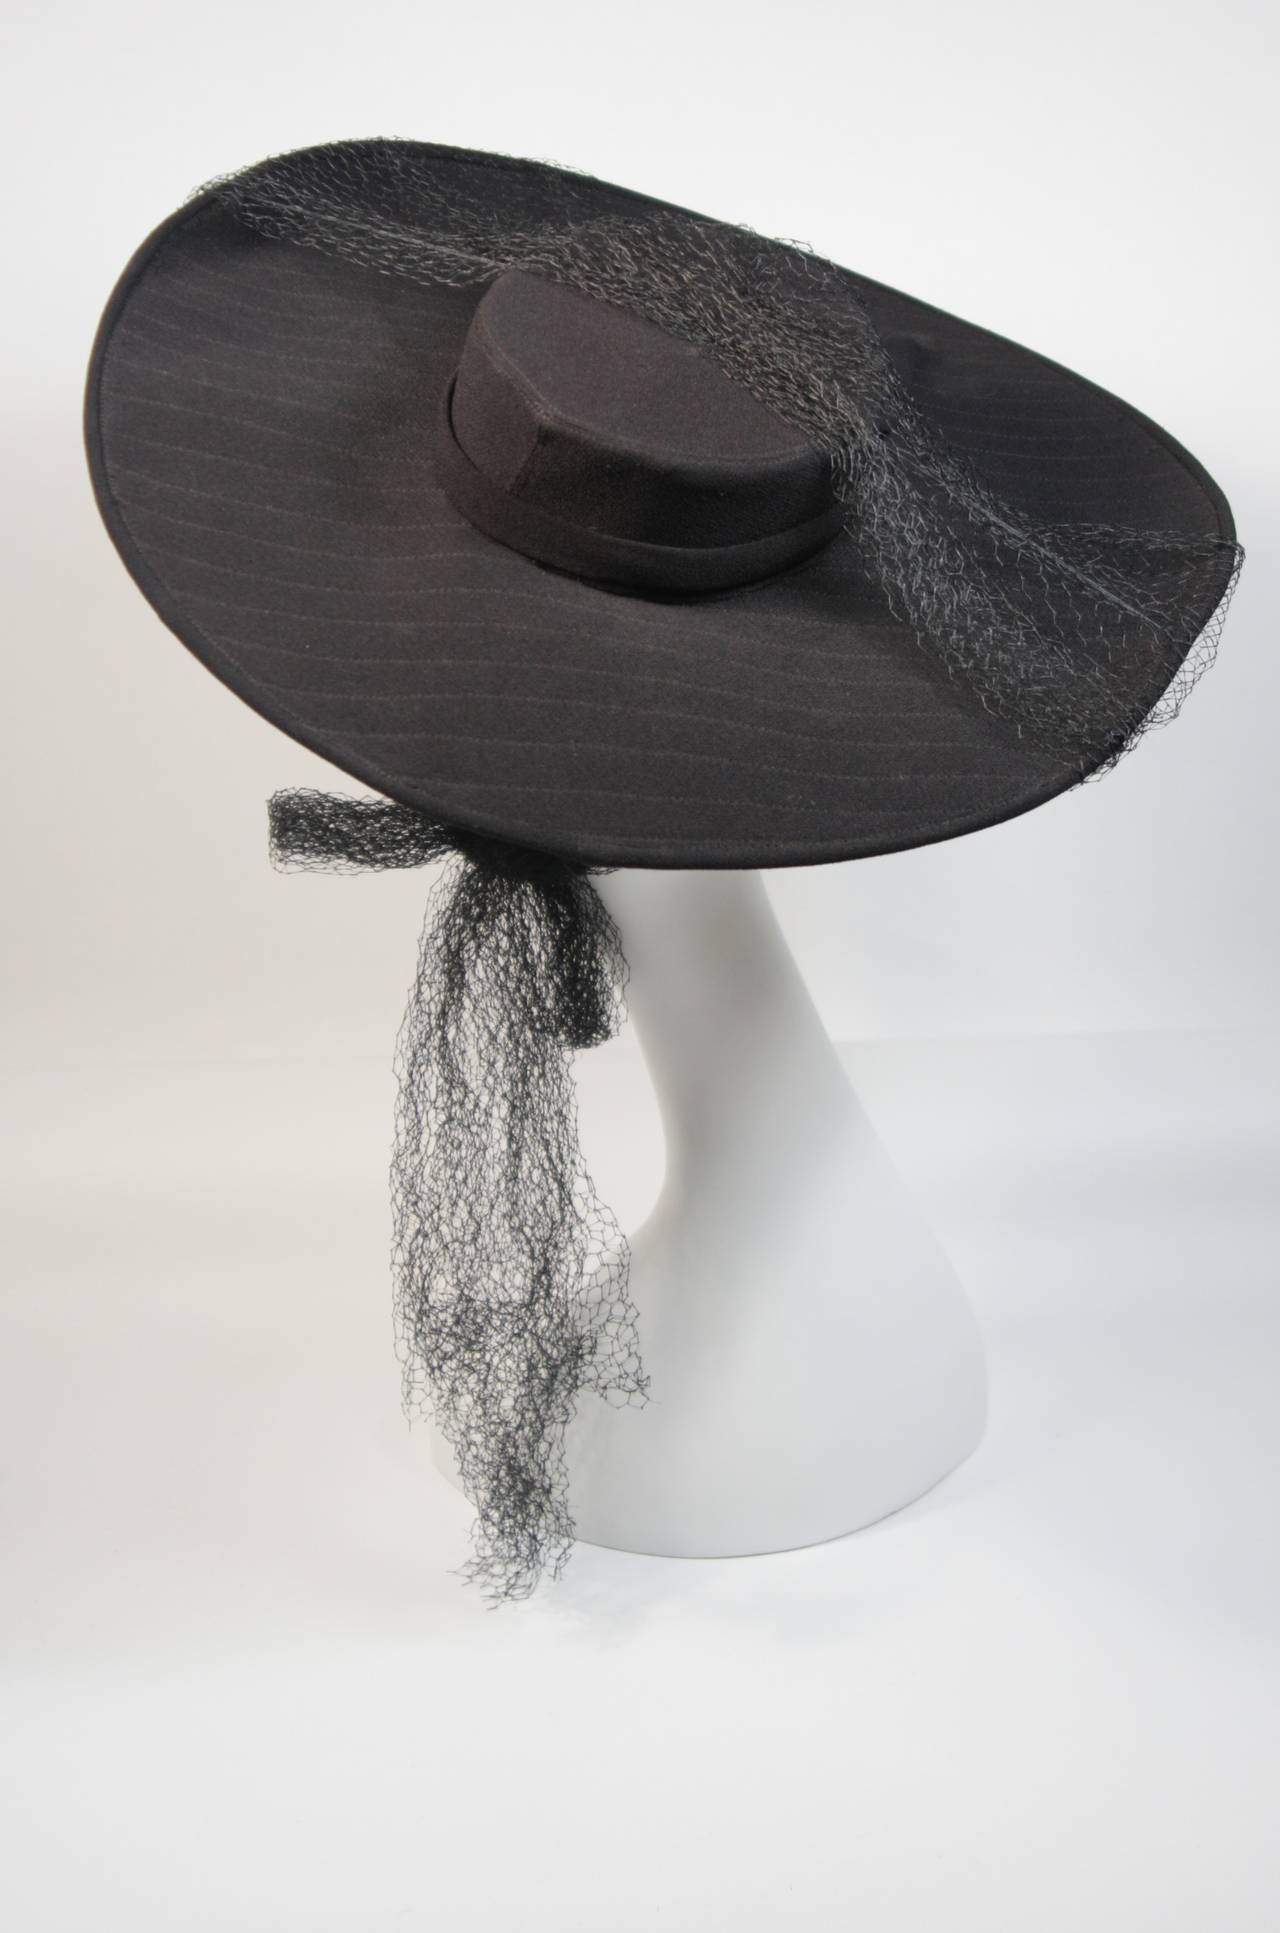 Yvonne California Black Pin Stripe Hat with Bow and Mesh Detail For Sale 2